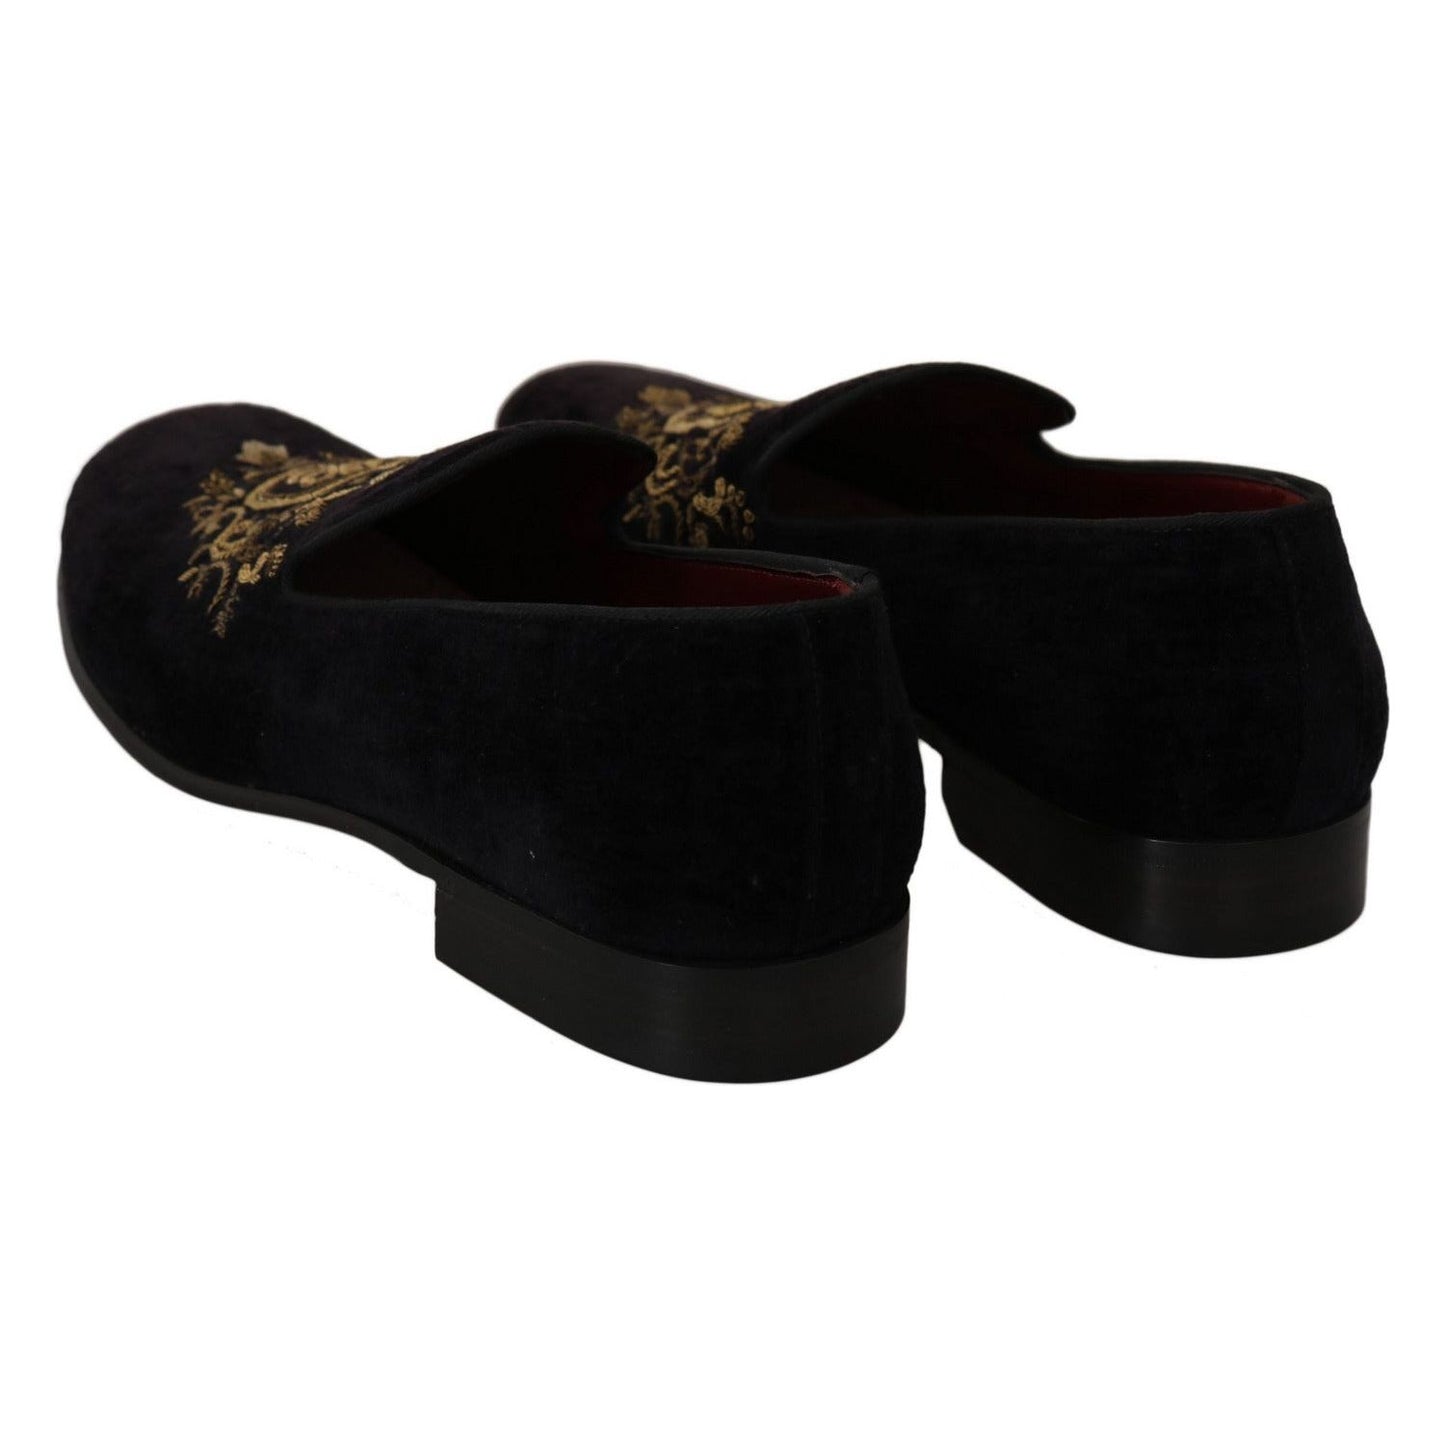 Dolce & Gabbana Elegant Black Loafers with Gold Crown Embroidery brown-suede-leather-stiletto-shoes-heels